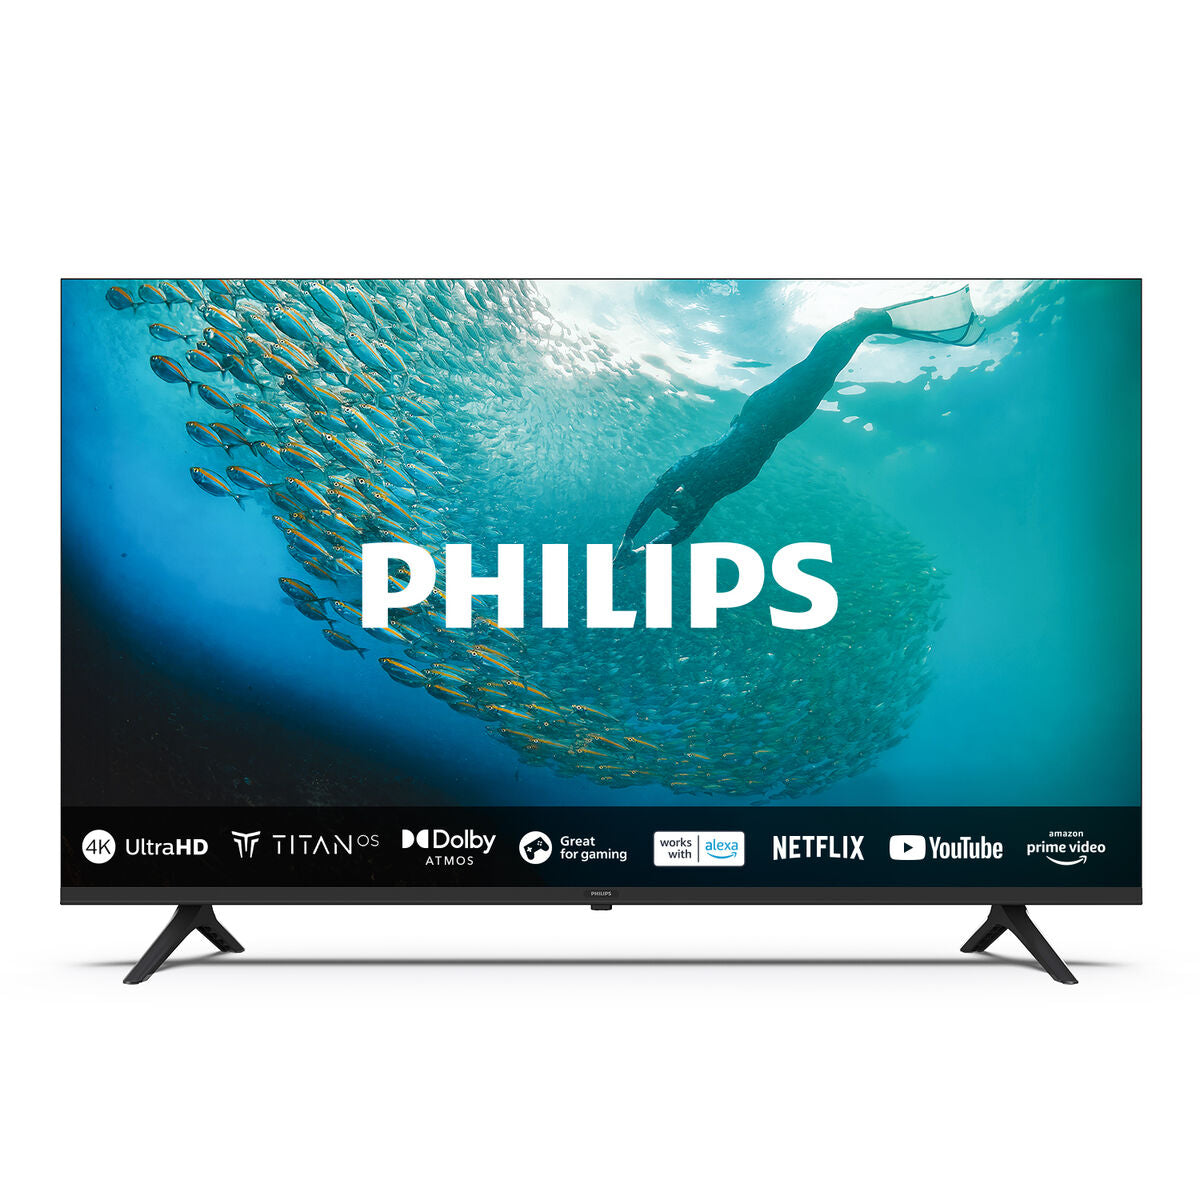 Smart TV Philips 50PUS7009 4K Ultra HD 50" LED HDR, Philips, Electronics, TV, Video and home cinema, smart-tv-philips-50pus7009-4k-ultra-hd-50-led-hdr, Brand_Philips, category-reference-2609, category-reference-2625, category-reference-2931, category-reference-t-18805, category-reference-t-18827, category-reference-t-19653, cinema and television, Condition_NEW, entertainment, Price_400 - 500, RiotNook